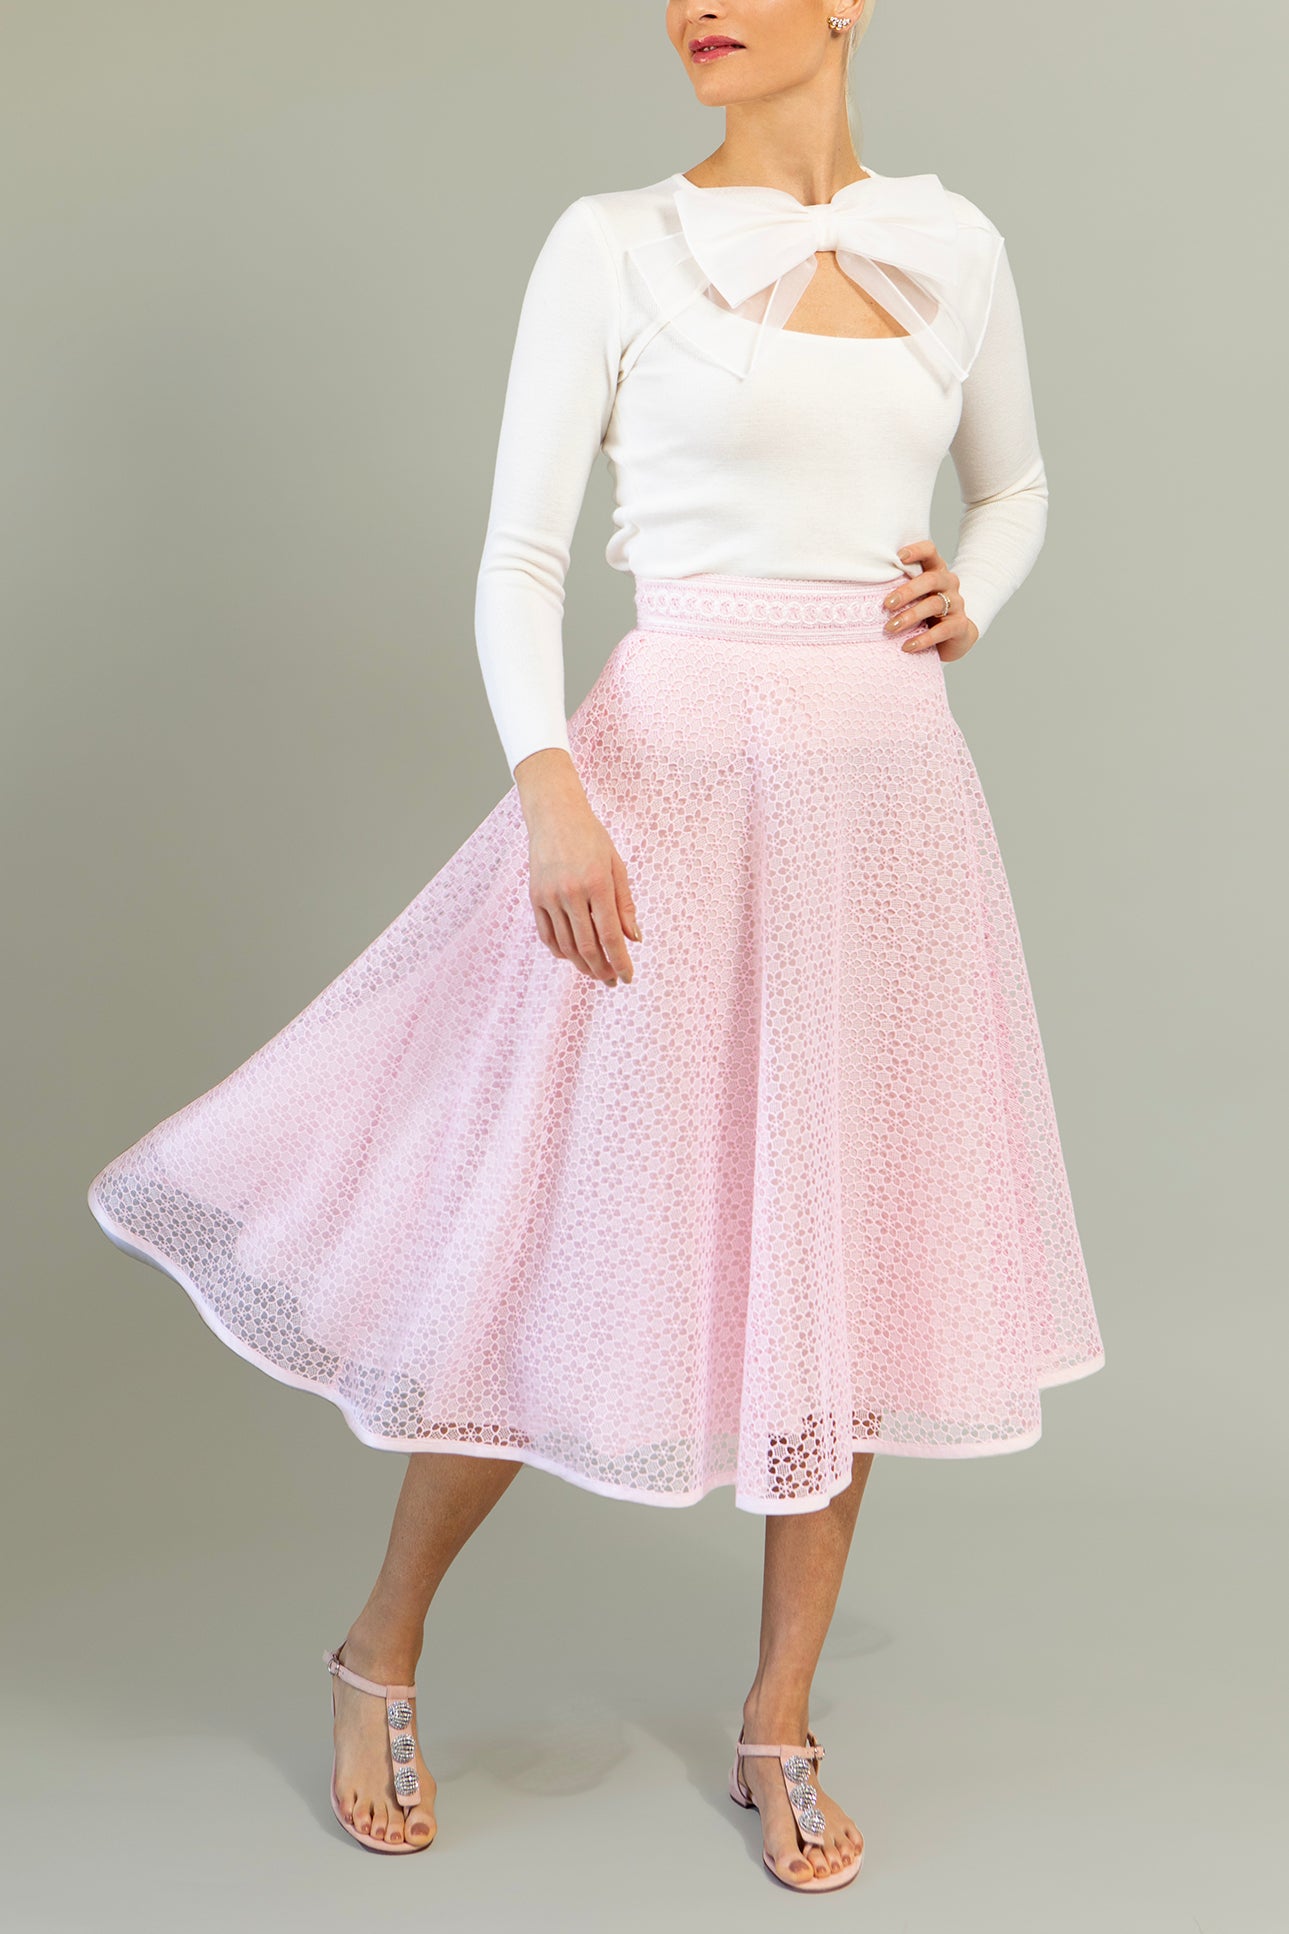 GIAMBATTISTA VALLI-Floral Lace Skirt-CHMPAGNE ROSE